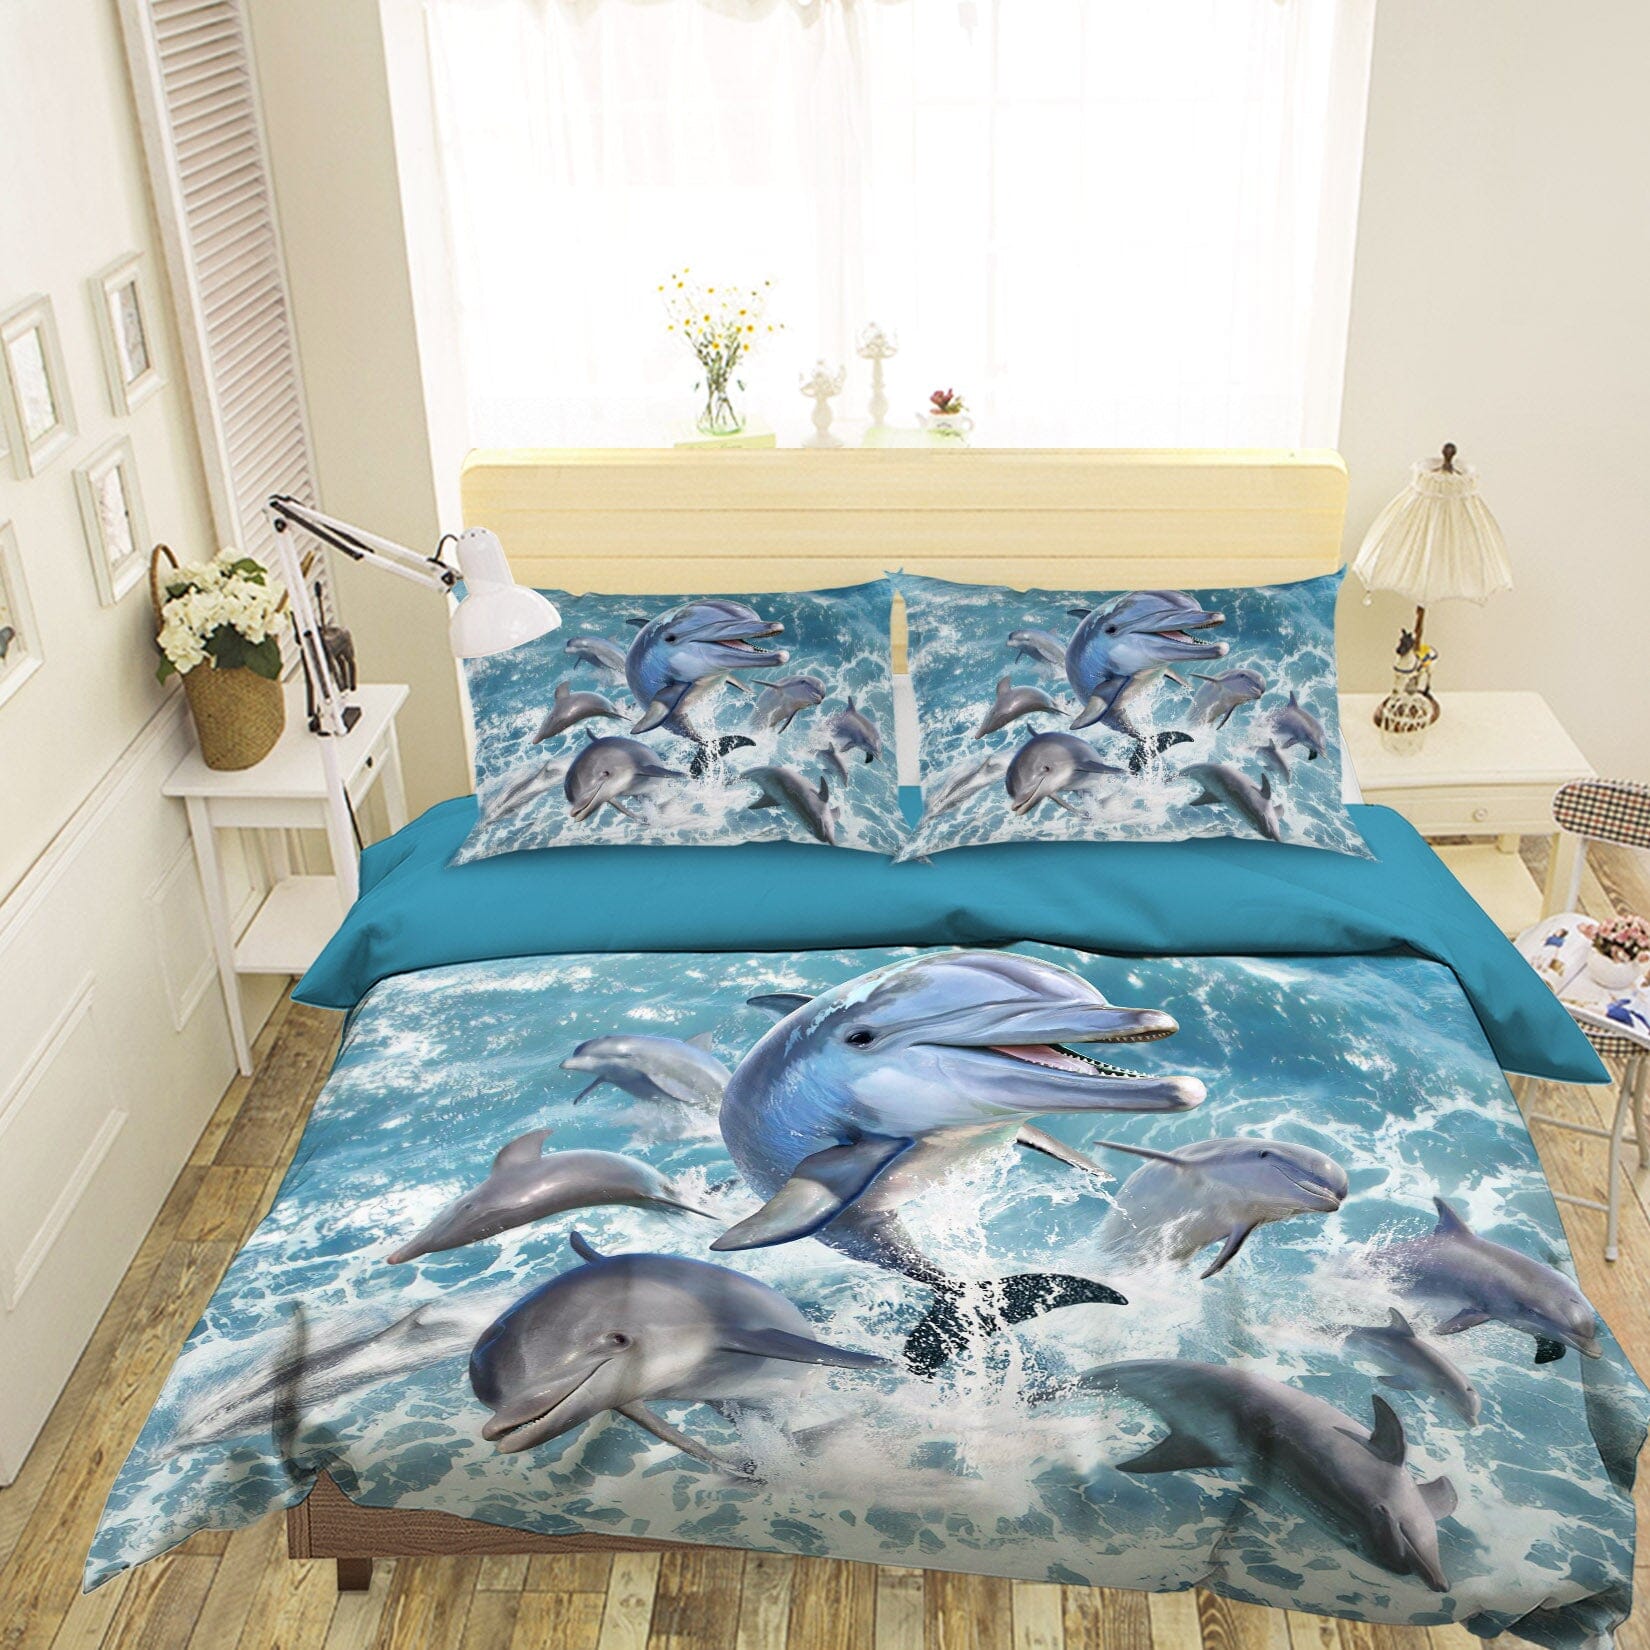 3D Dolphin Jump 2104 Jerry LoFaro bedding Bed Pillowcases Quilt Quiet Covers AJ Creativity Home 